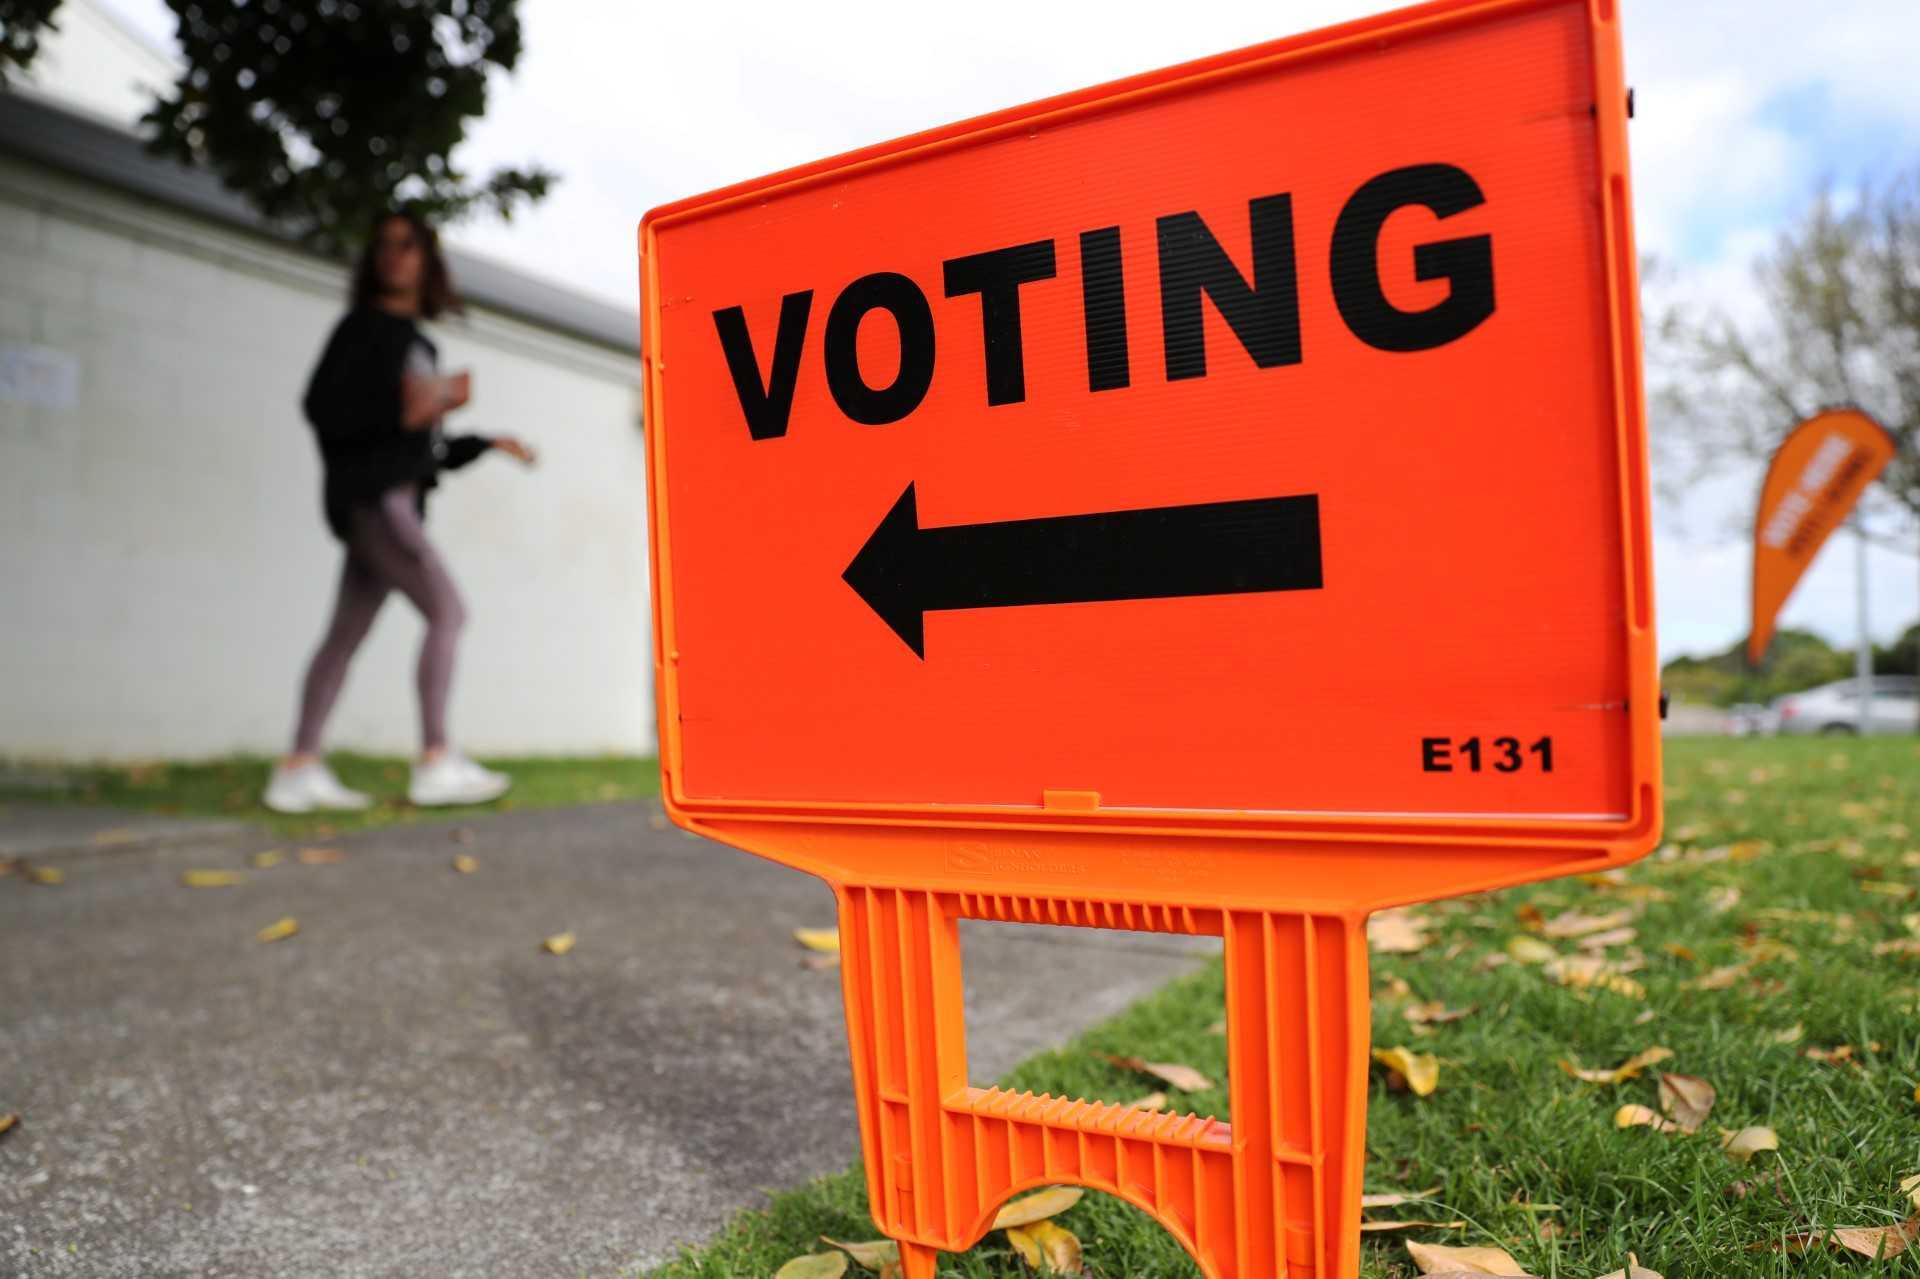 Polling booths open on election day for the 2020 General Election of New Zealand in Auckland on Oct 17, 2020. Photo: AFP 